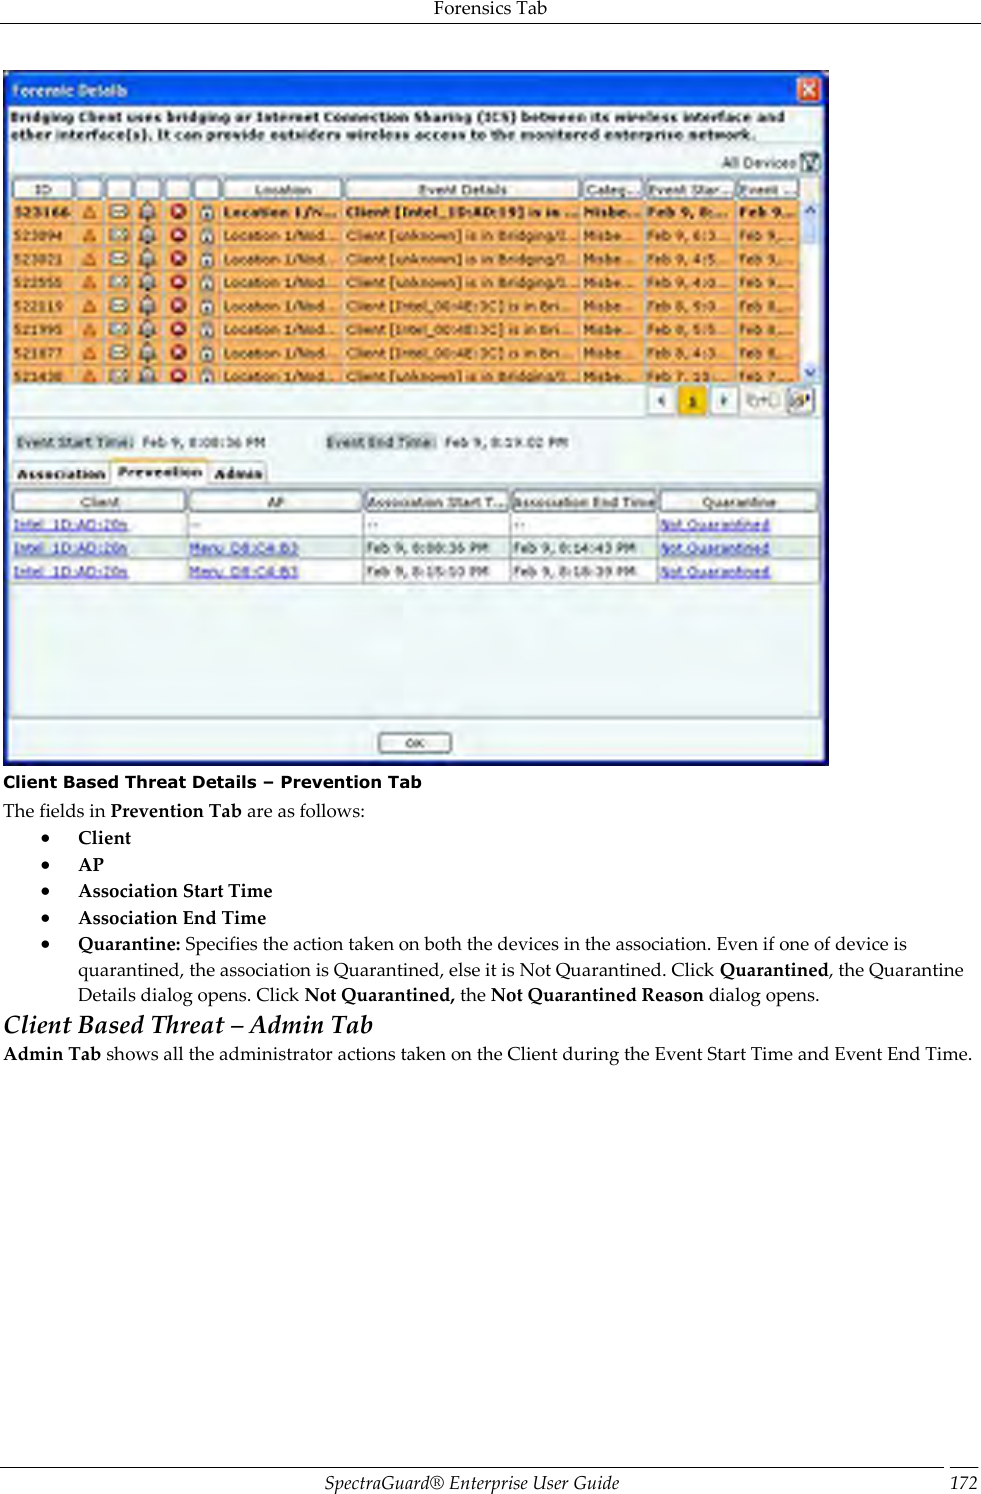 Forensics Tab SpectraGuard®  Enterprise User Guide 172  Client Based Threat Details – Prevention Tab The fields in Prevention Tab are as follows:  Client  AP  Association Start Time  Association End Time  Quarantine: Specifies the action taken on both the devices in the association. Even if one of device is quarantined, the association is Quarantined, else it is Not Quarantined. Click Quarantined, the Quarantine Details dialog opens. Click Not Quarantined, the Not Quarantined Reason dialog opens. Client Based Threat – Admin Tab Admin Tab shows all the administrator actions taken on the Client during the Event Start Time and Event End Time. 